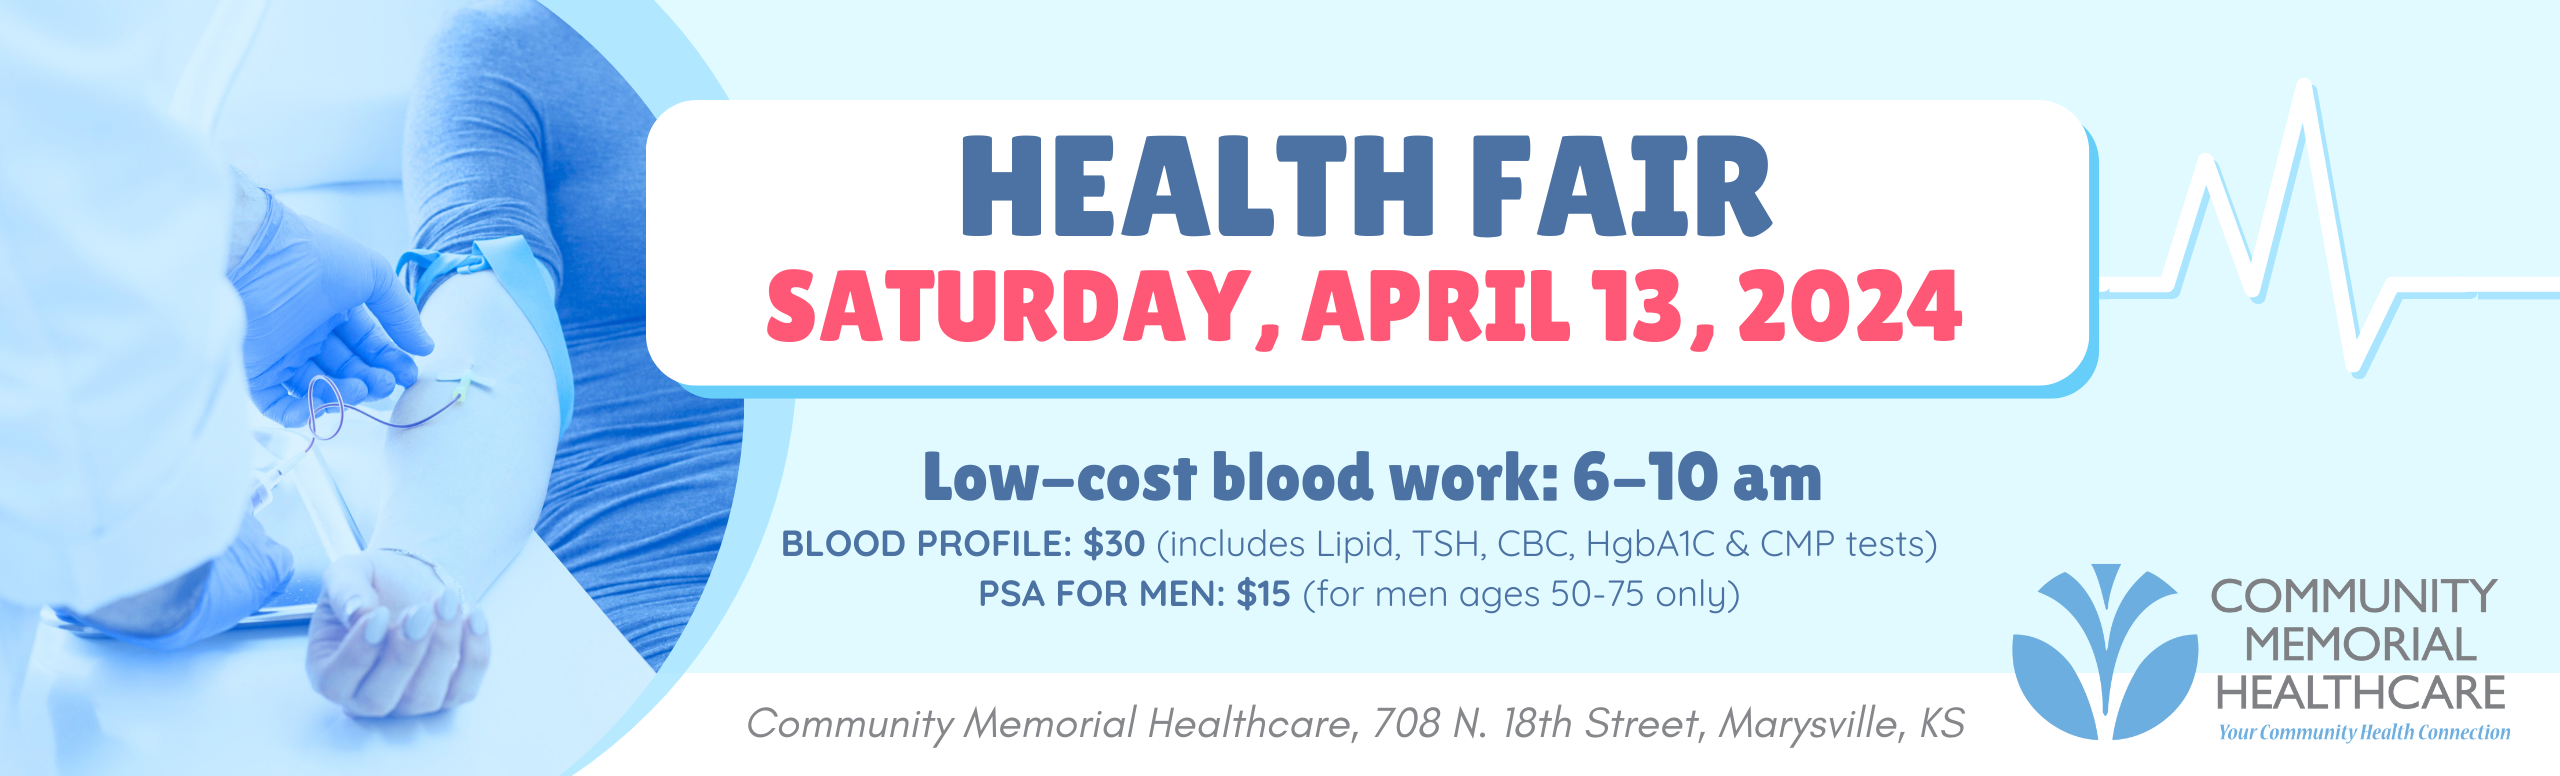 Health Fair 
Saturday, April 13, 2024

Low-cost blood work: 6-10am

Blood Profile: $30 (Includes Lipid, TSH, CBC, HgbA1C & CMP tests) 
PSA For Men: $15 (for men ages 50-75 only)